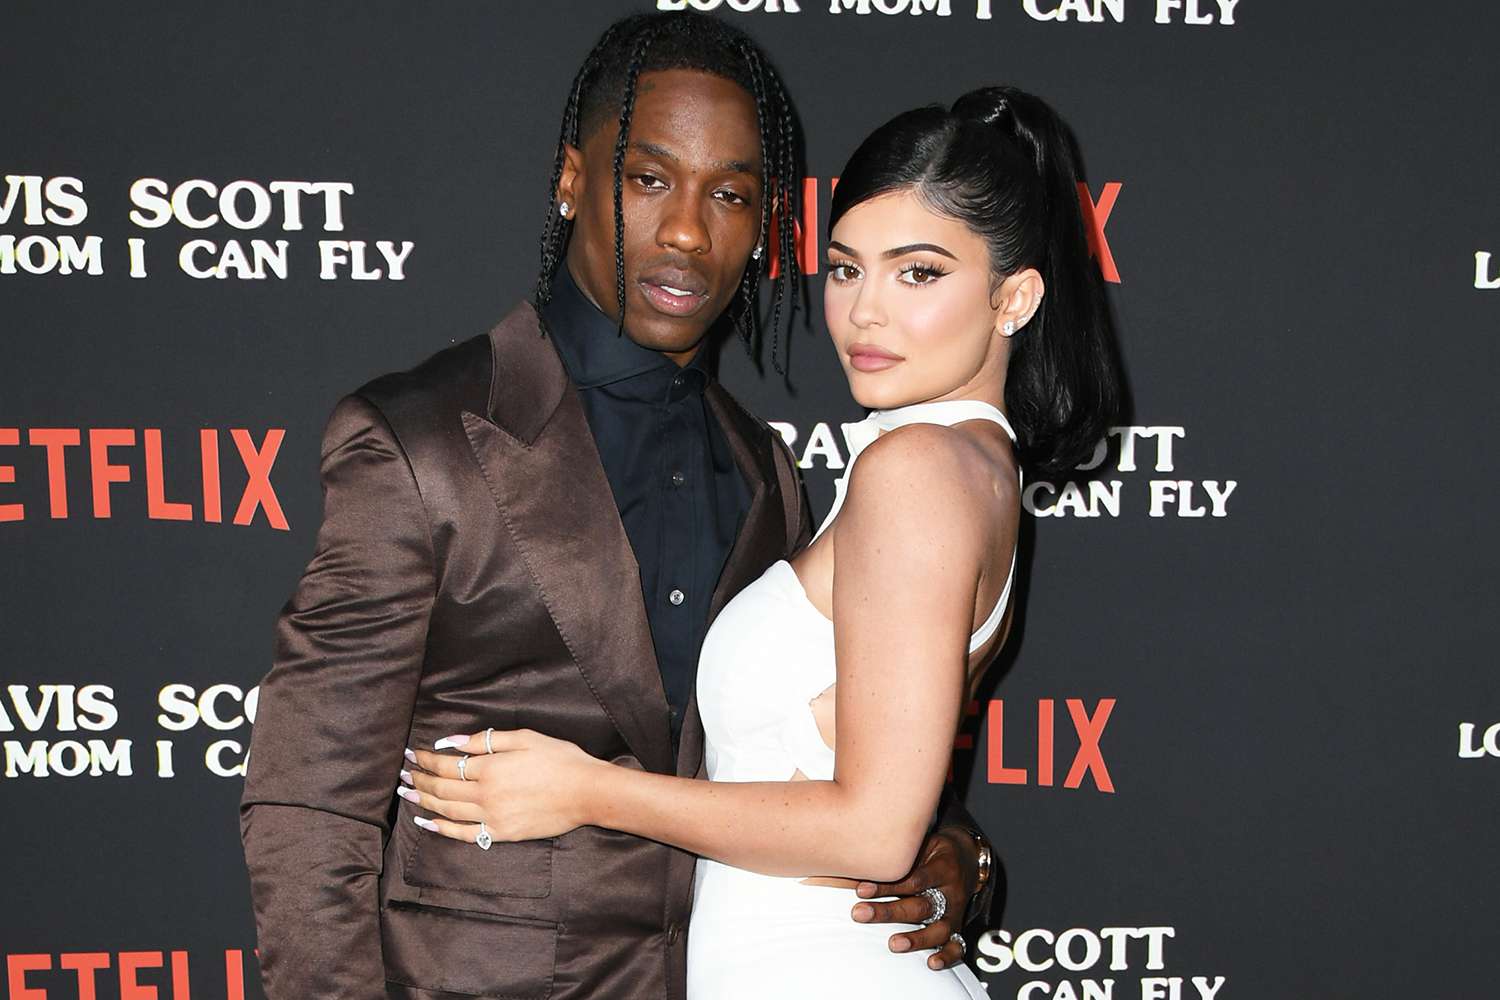 Travis Scott and Kylie Jenner attend the Premiere Of Netflix's "Travis Scott: Look Mom I Can Fly" at Barker Hangar on August 27, 2019 in Santa Monica, California.